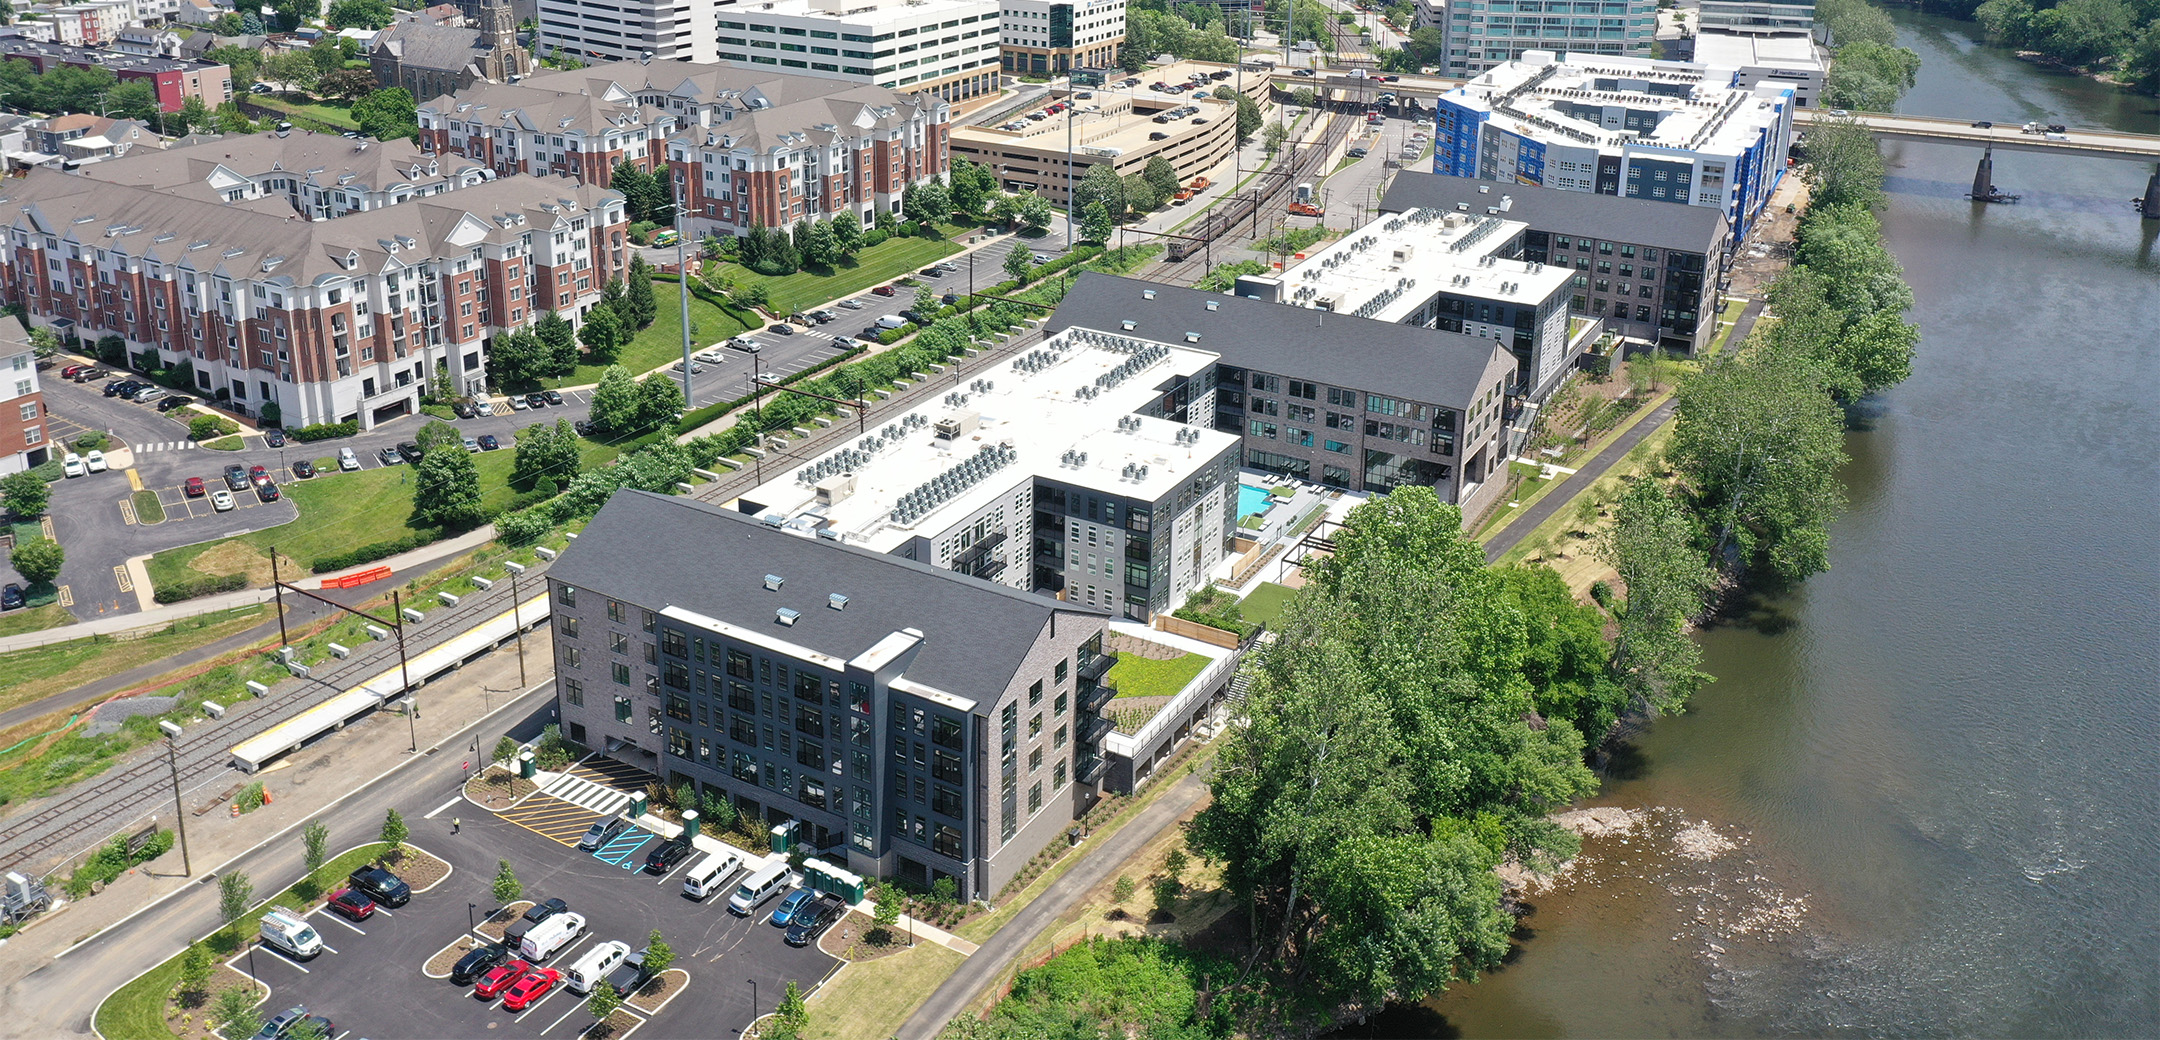 An aerial view of Matson Mill in Conshohocken, PA with the Schuylkill river and town on either side